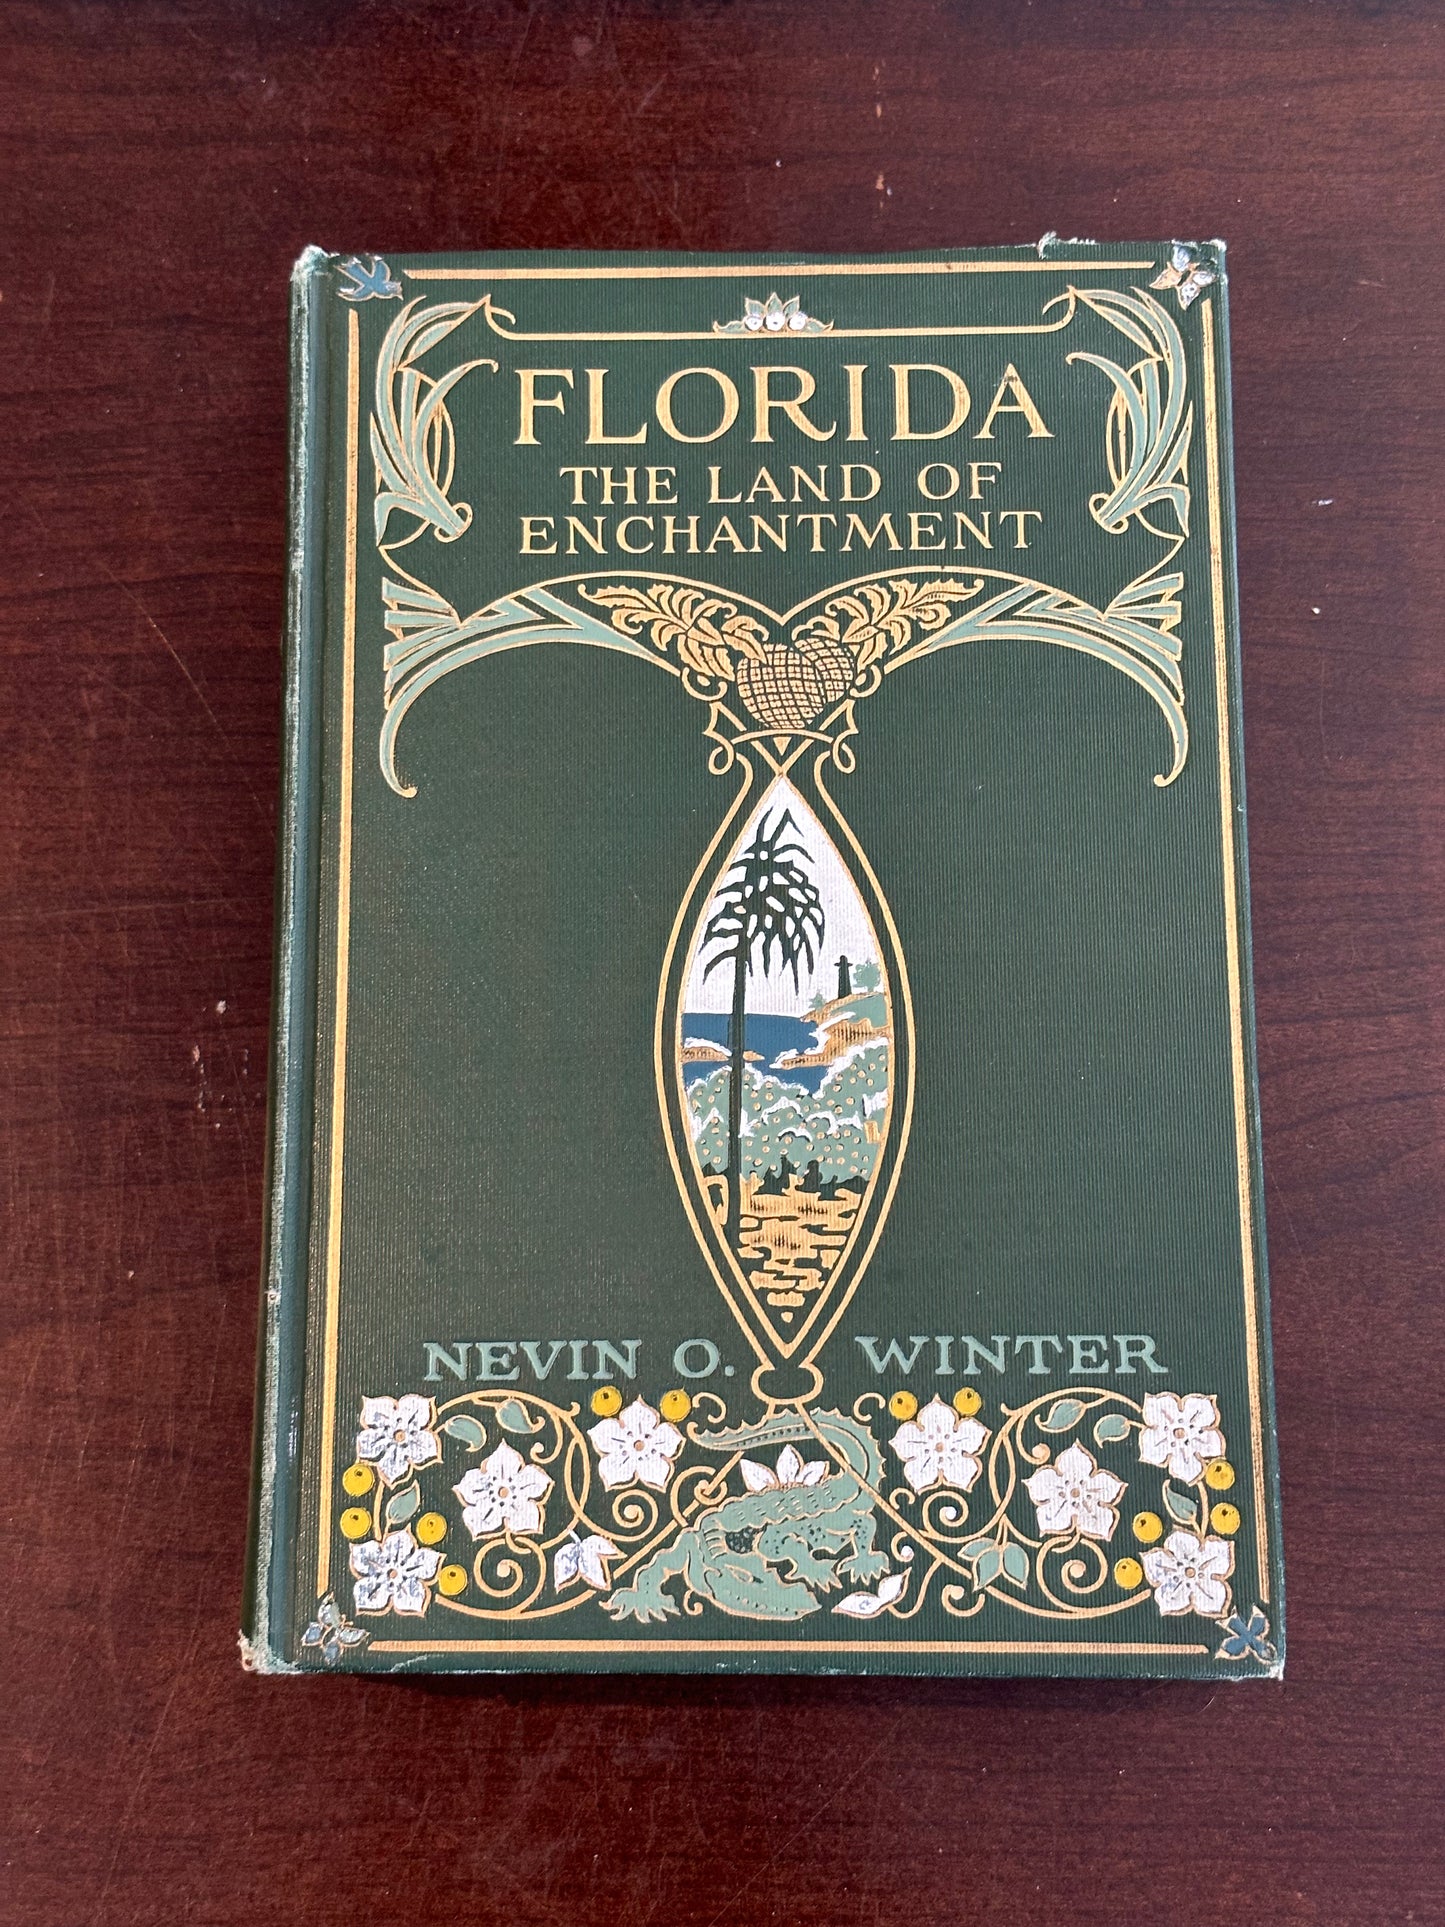 Florida: The Land of Enchantment by Nevin O. Winter